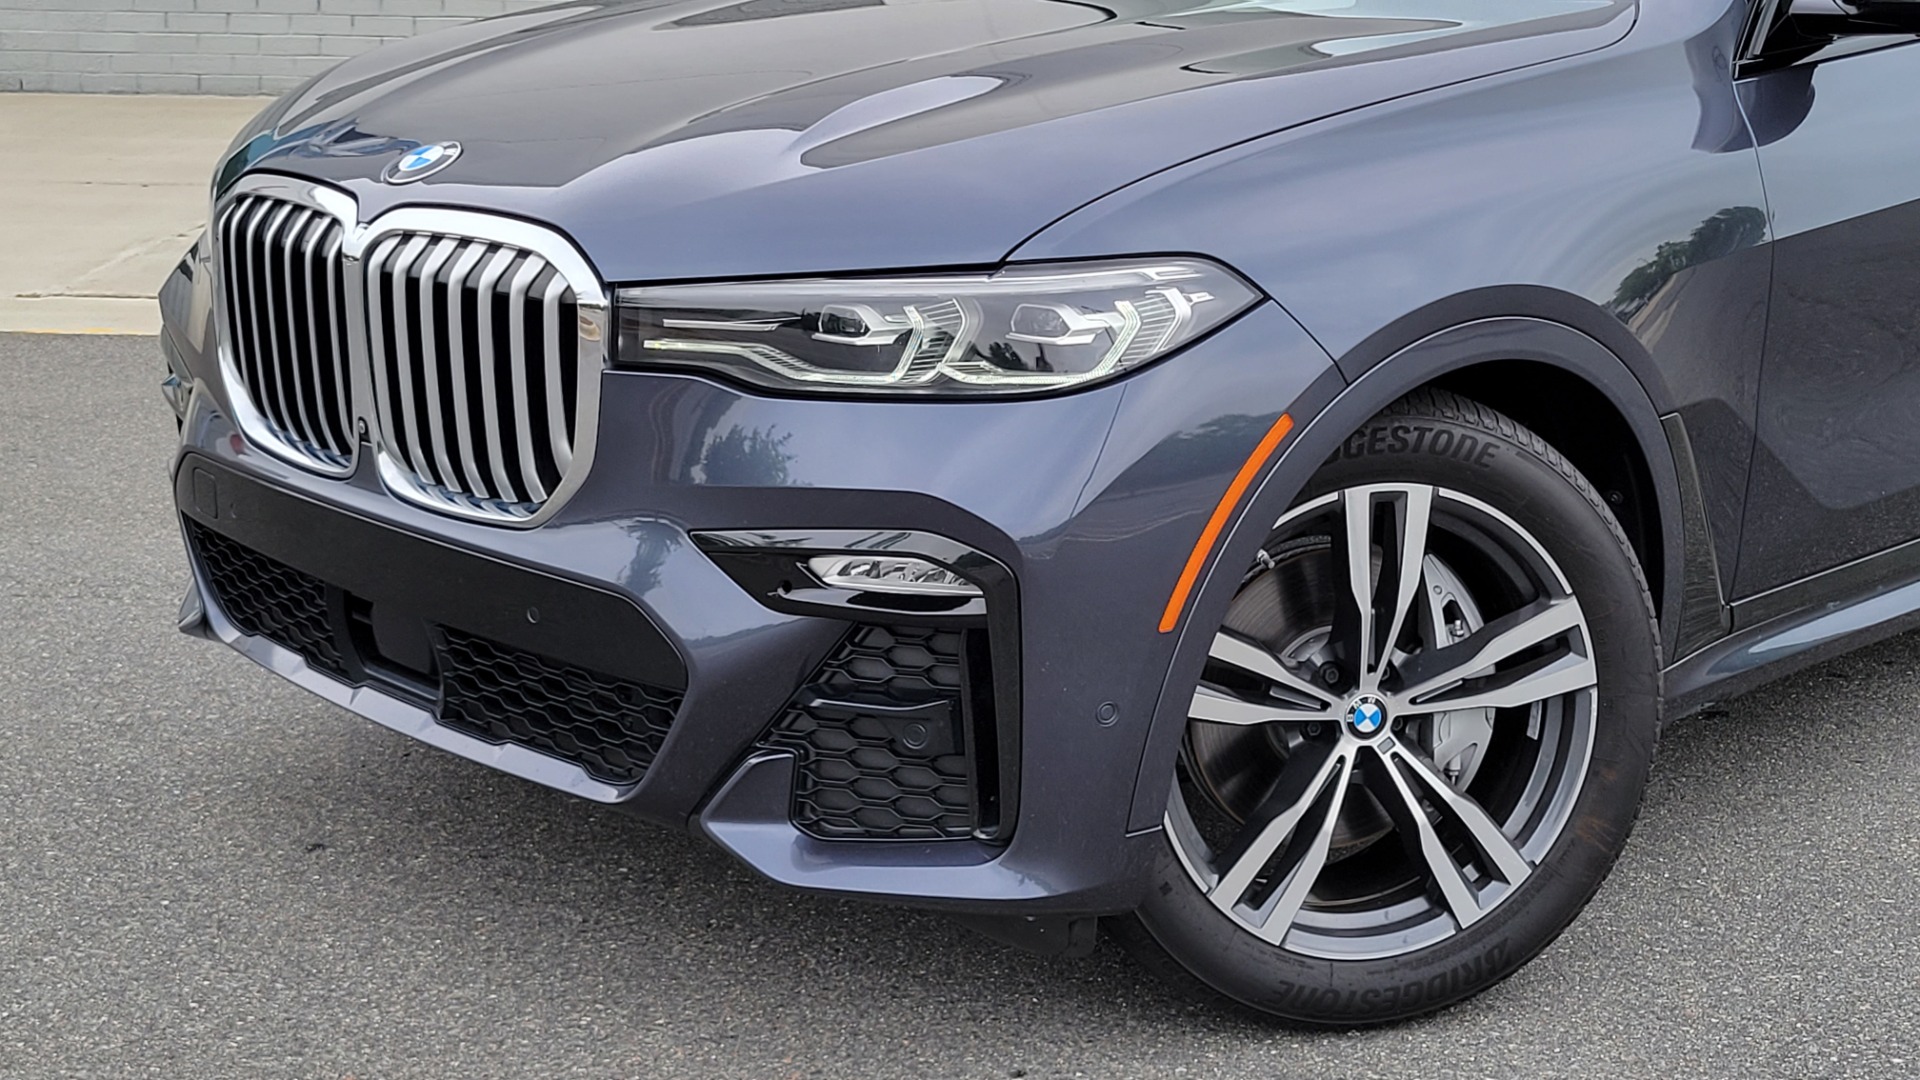 Used 2019 BMW X7 XDRIVE40I M-SPORT / PREMIUM / CLD THR / PARK ASST / DRVR ASST / SKY LOUNGE  for sale $64,395 at Formula Imports in Charlotte NC 28227 7